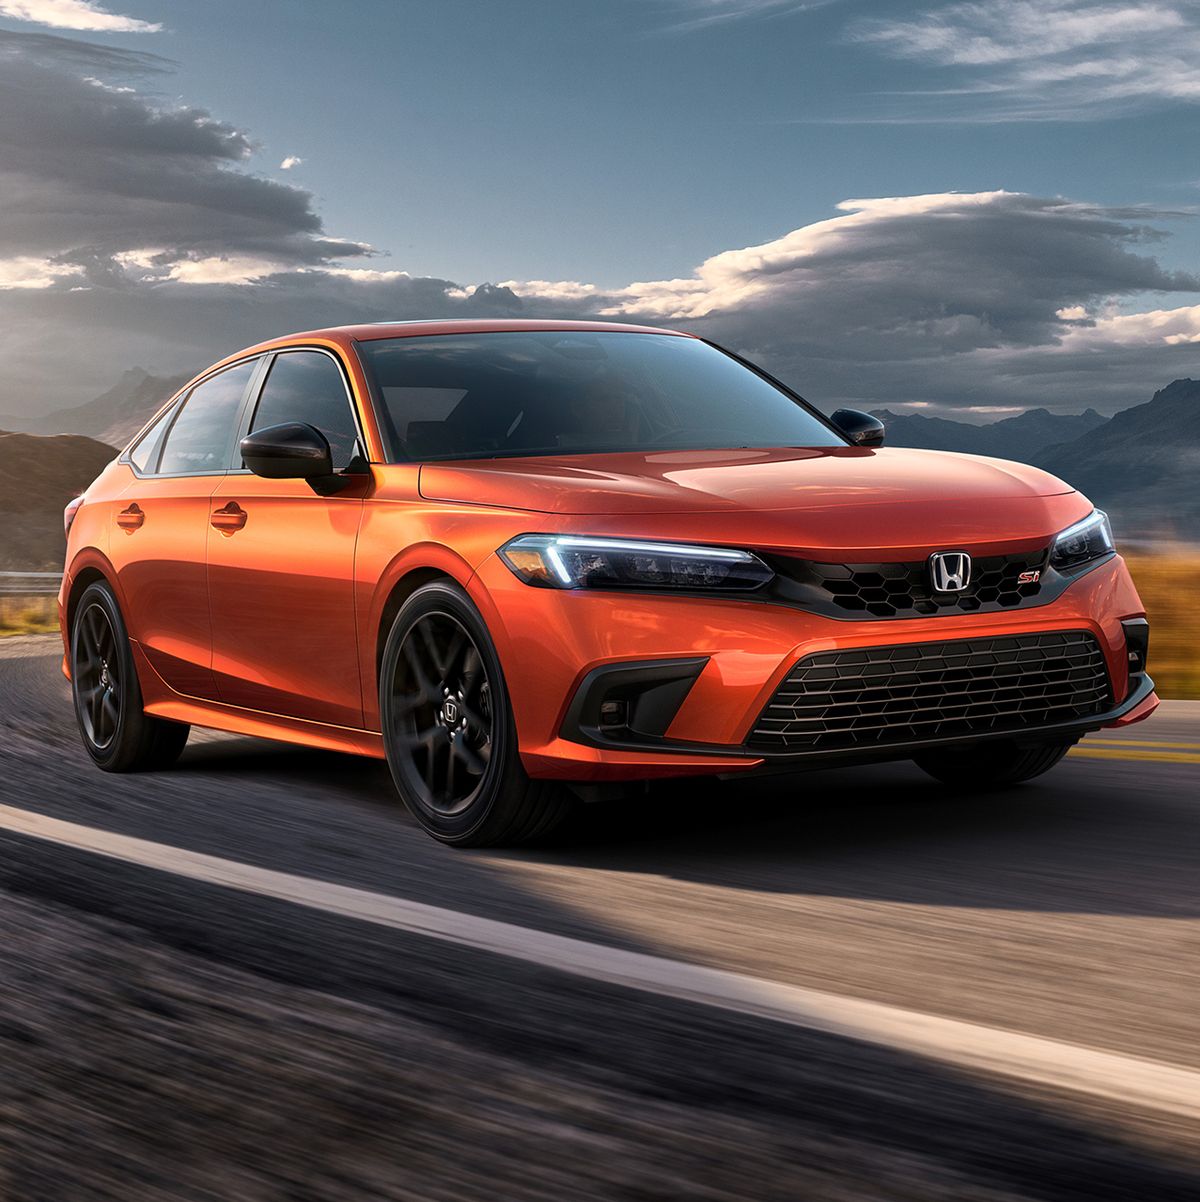 2022 Honda Civic Si: Everything You Need to Know